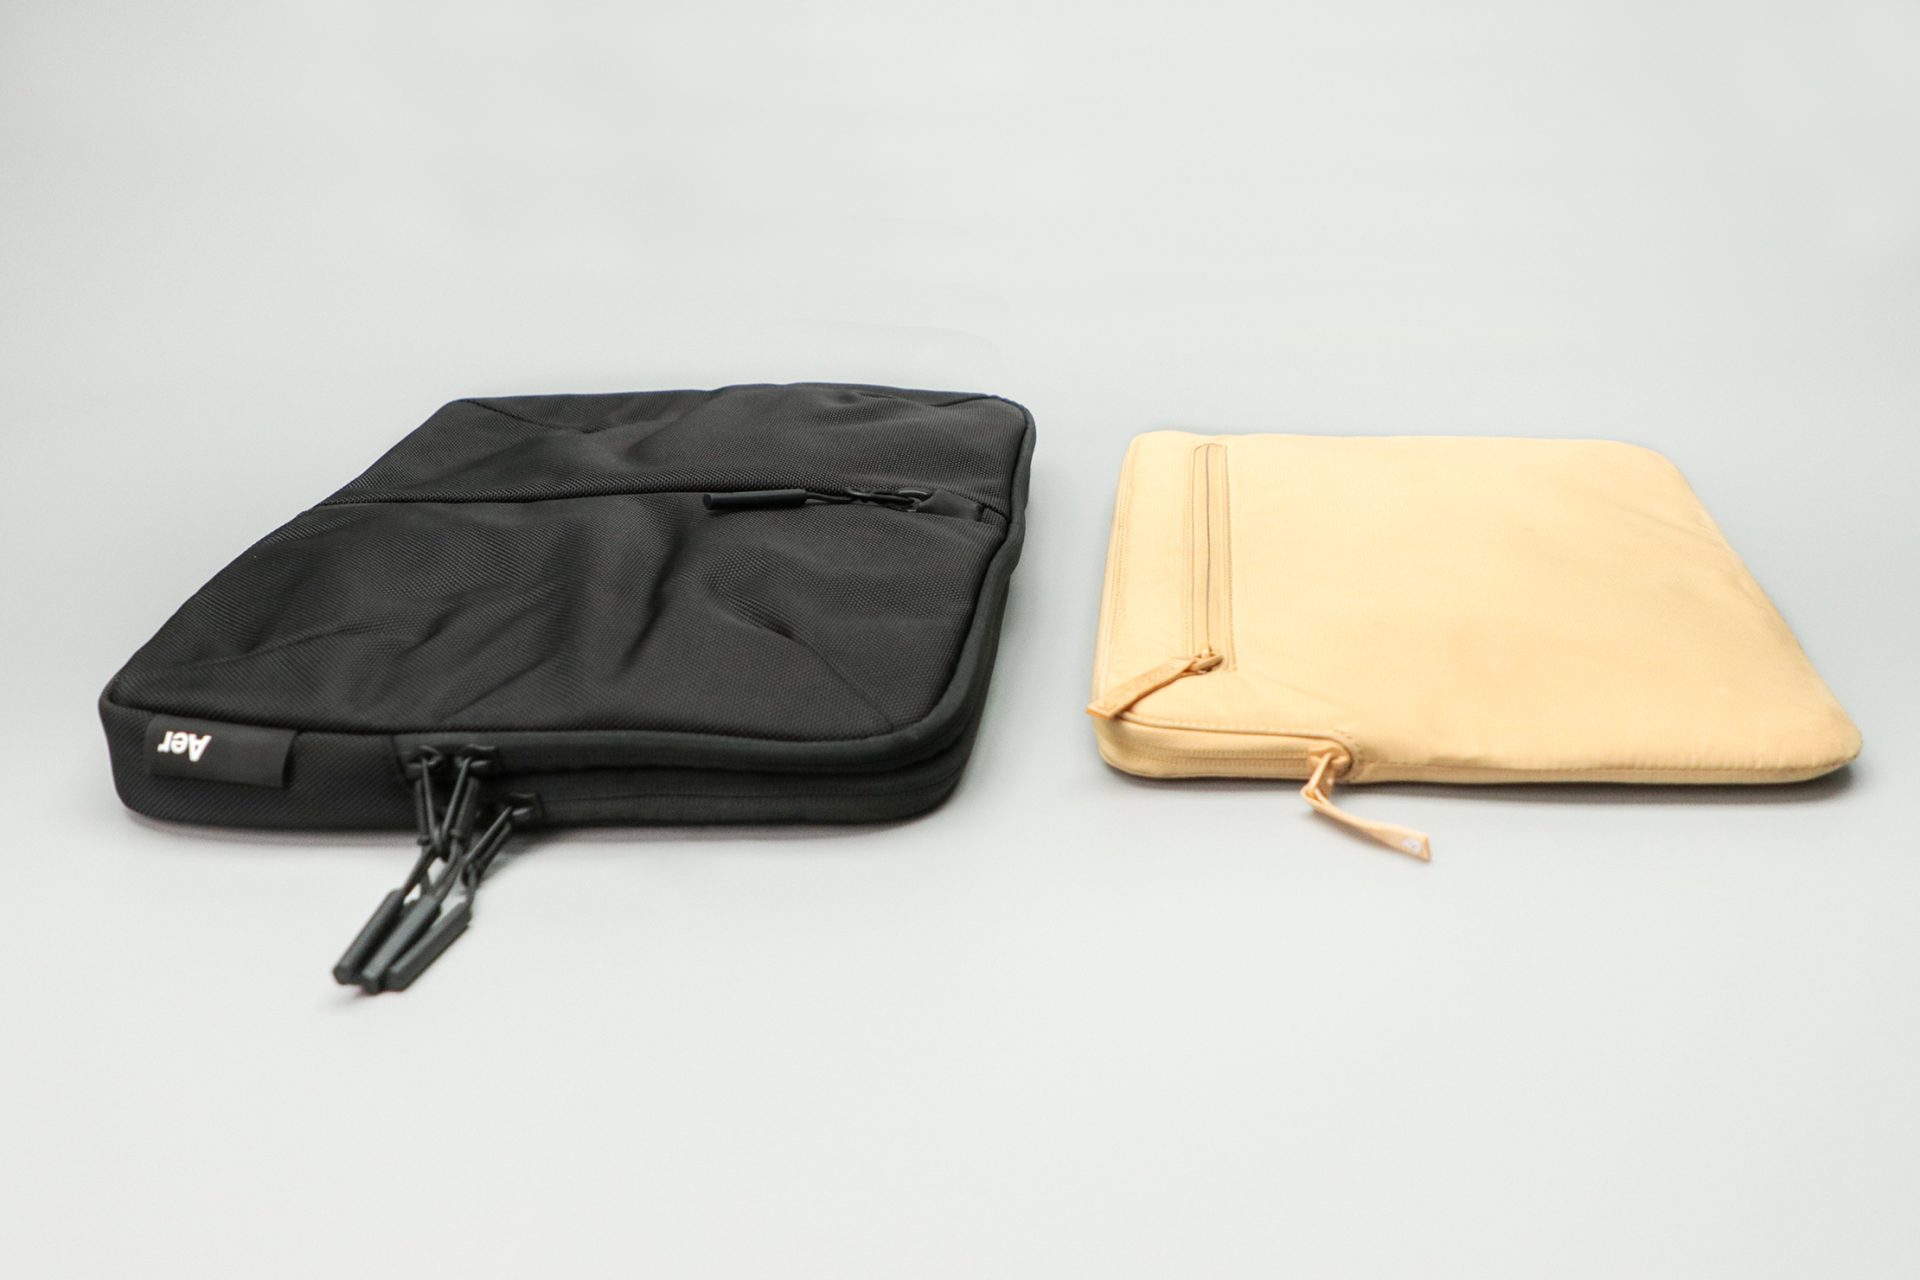 Incase Compact Sleeve with BIONIC compared to the Aer Tech Folio.